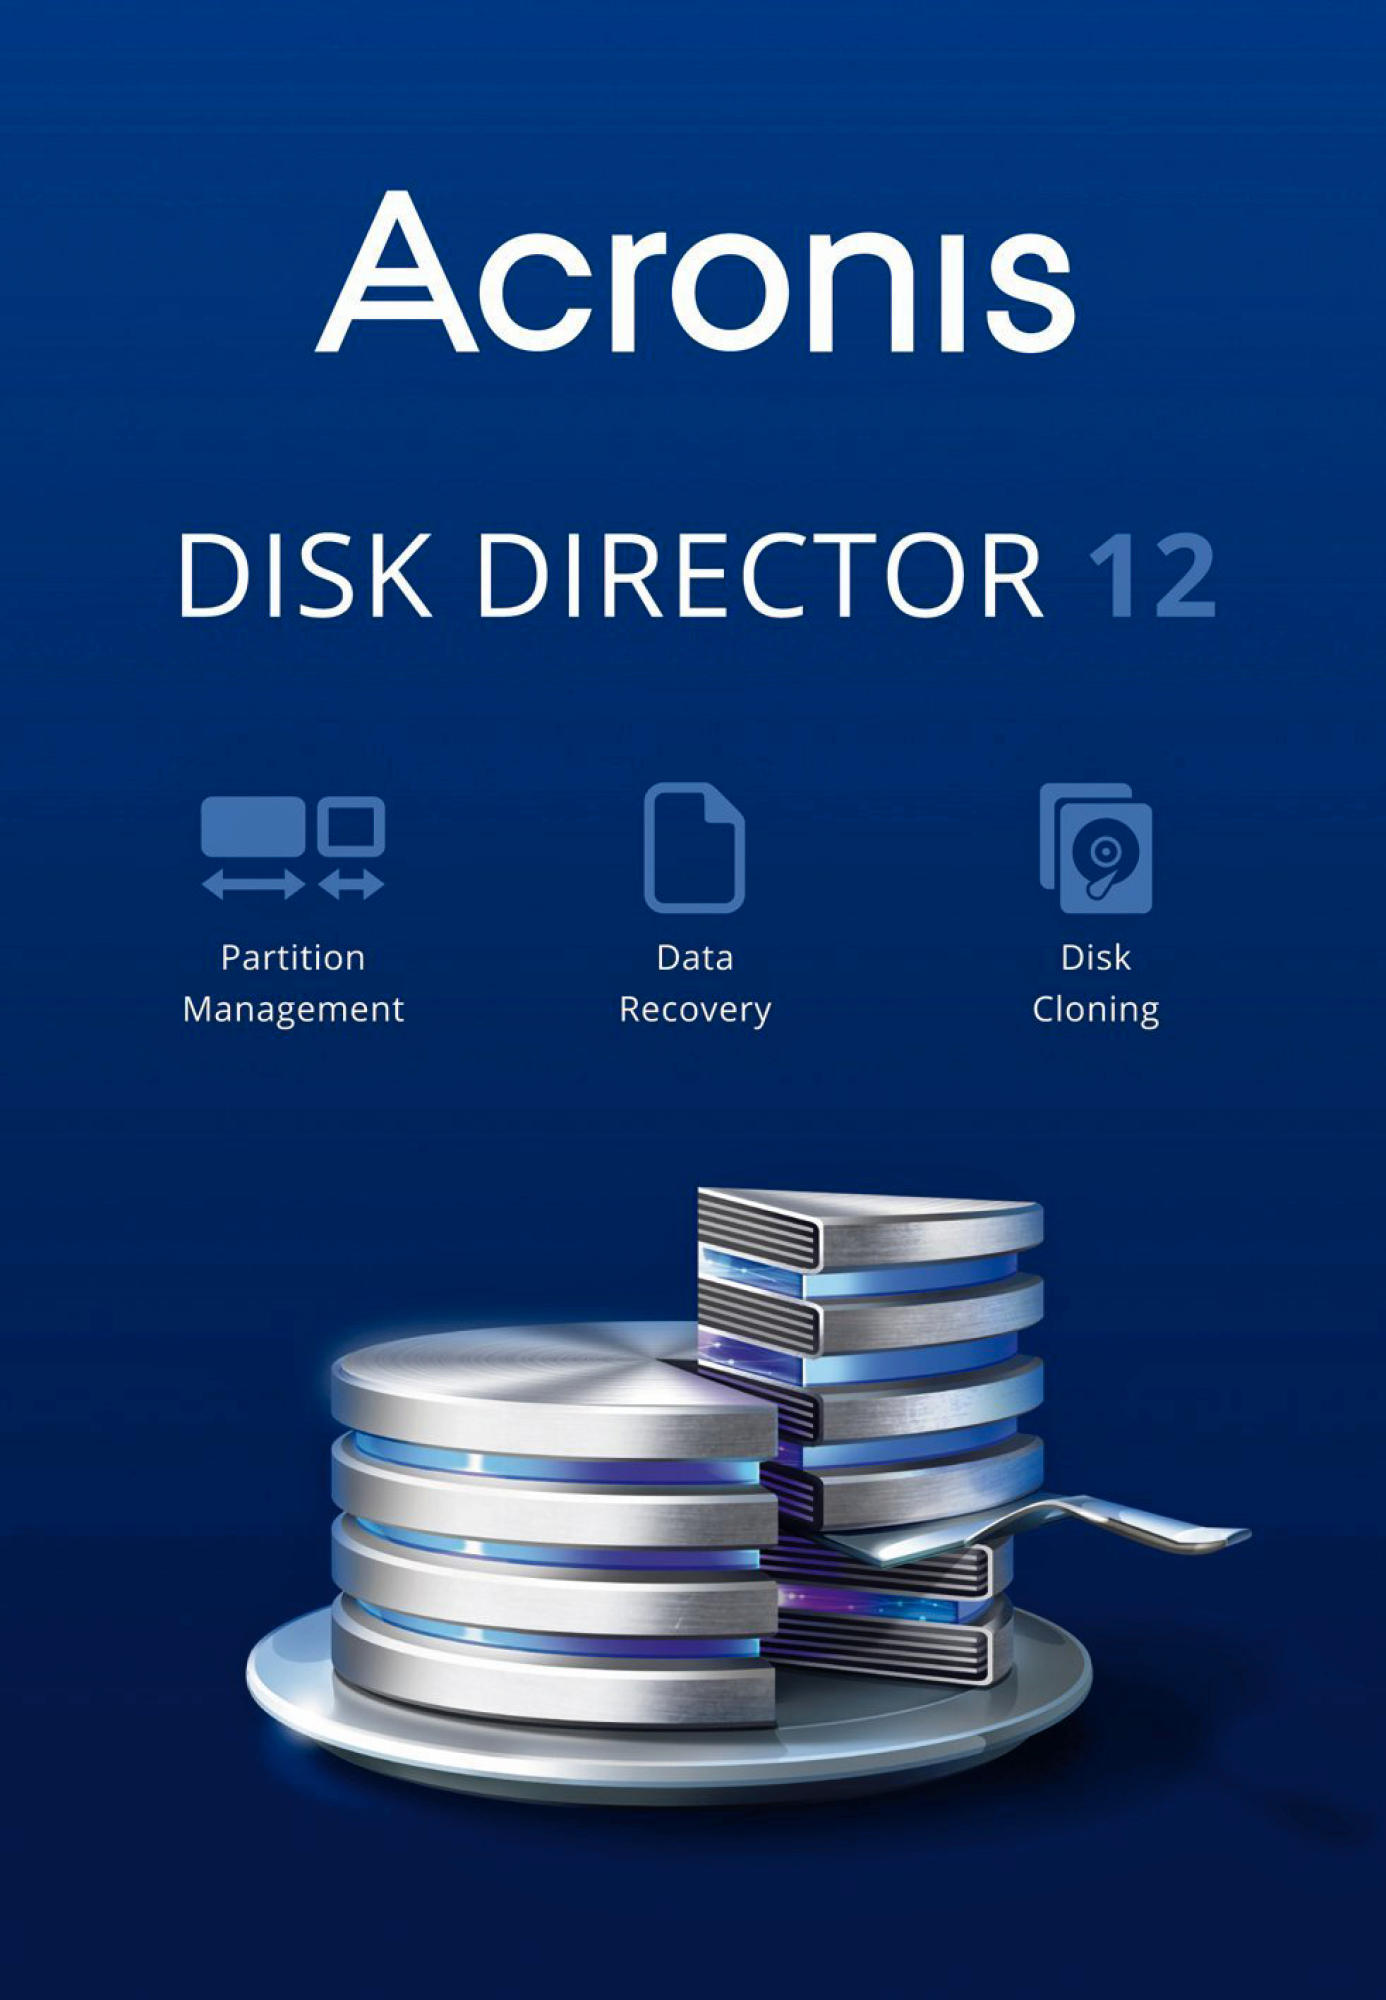 12 Acronis - Disk Director [PC]